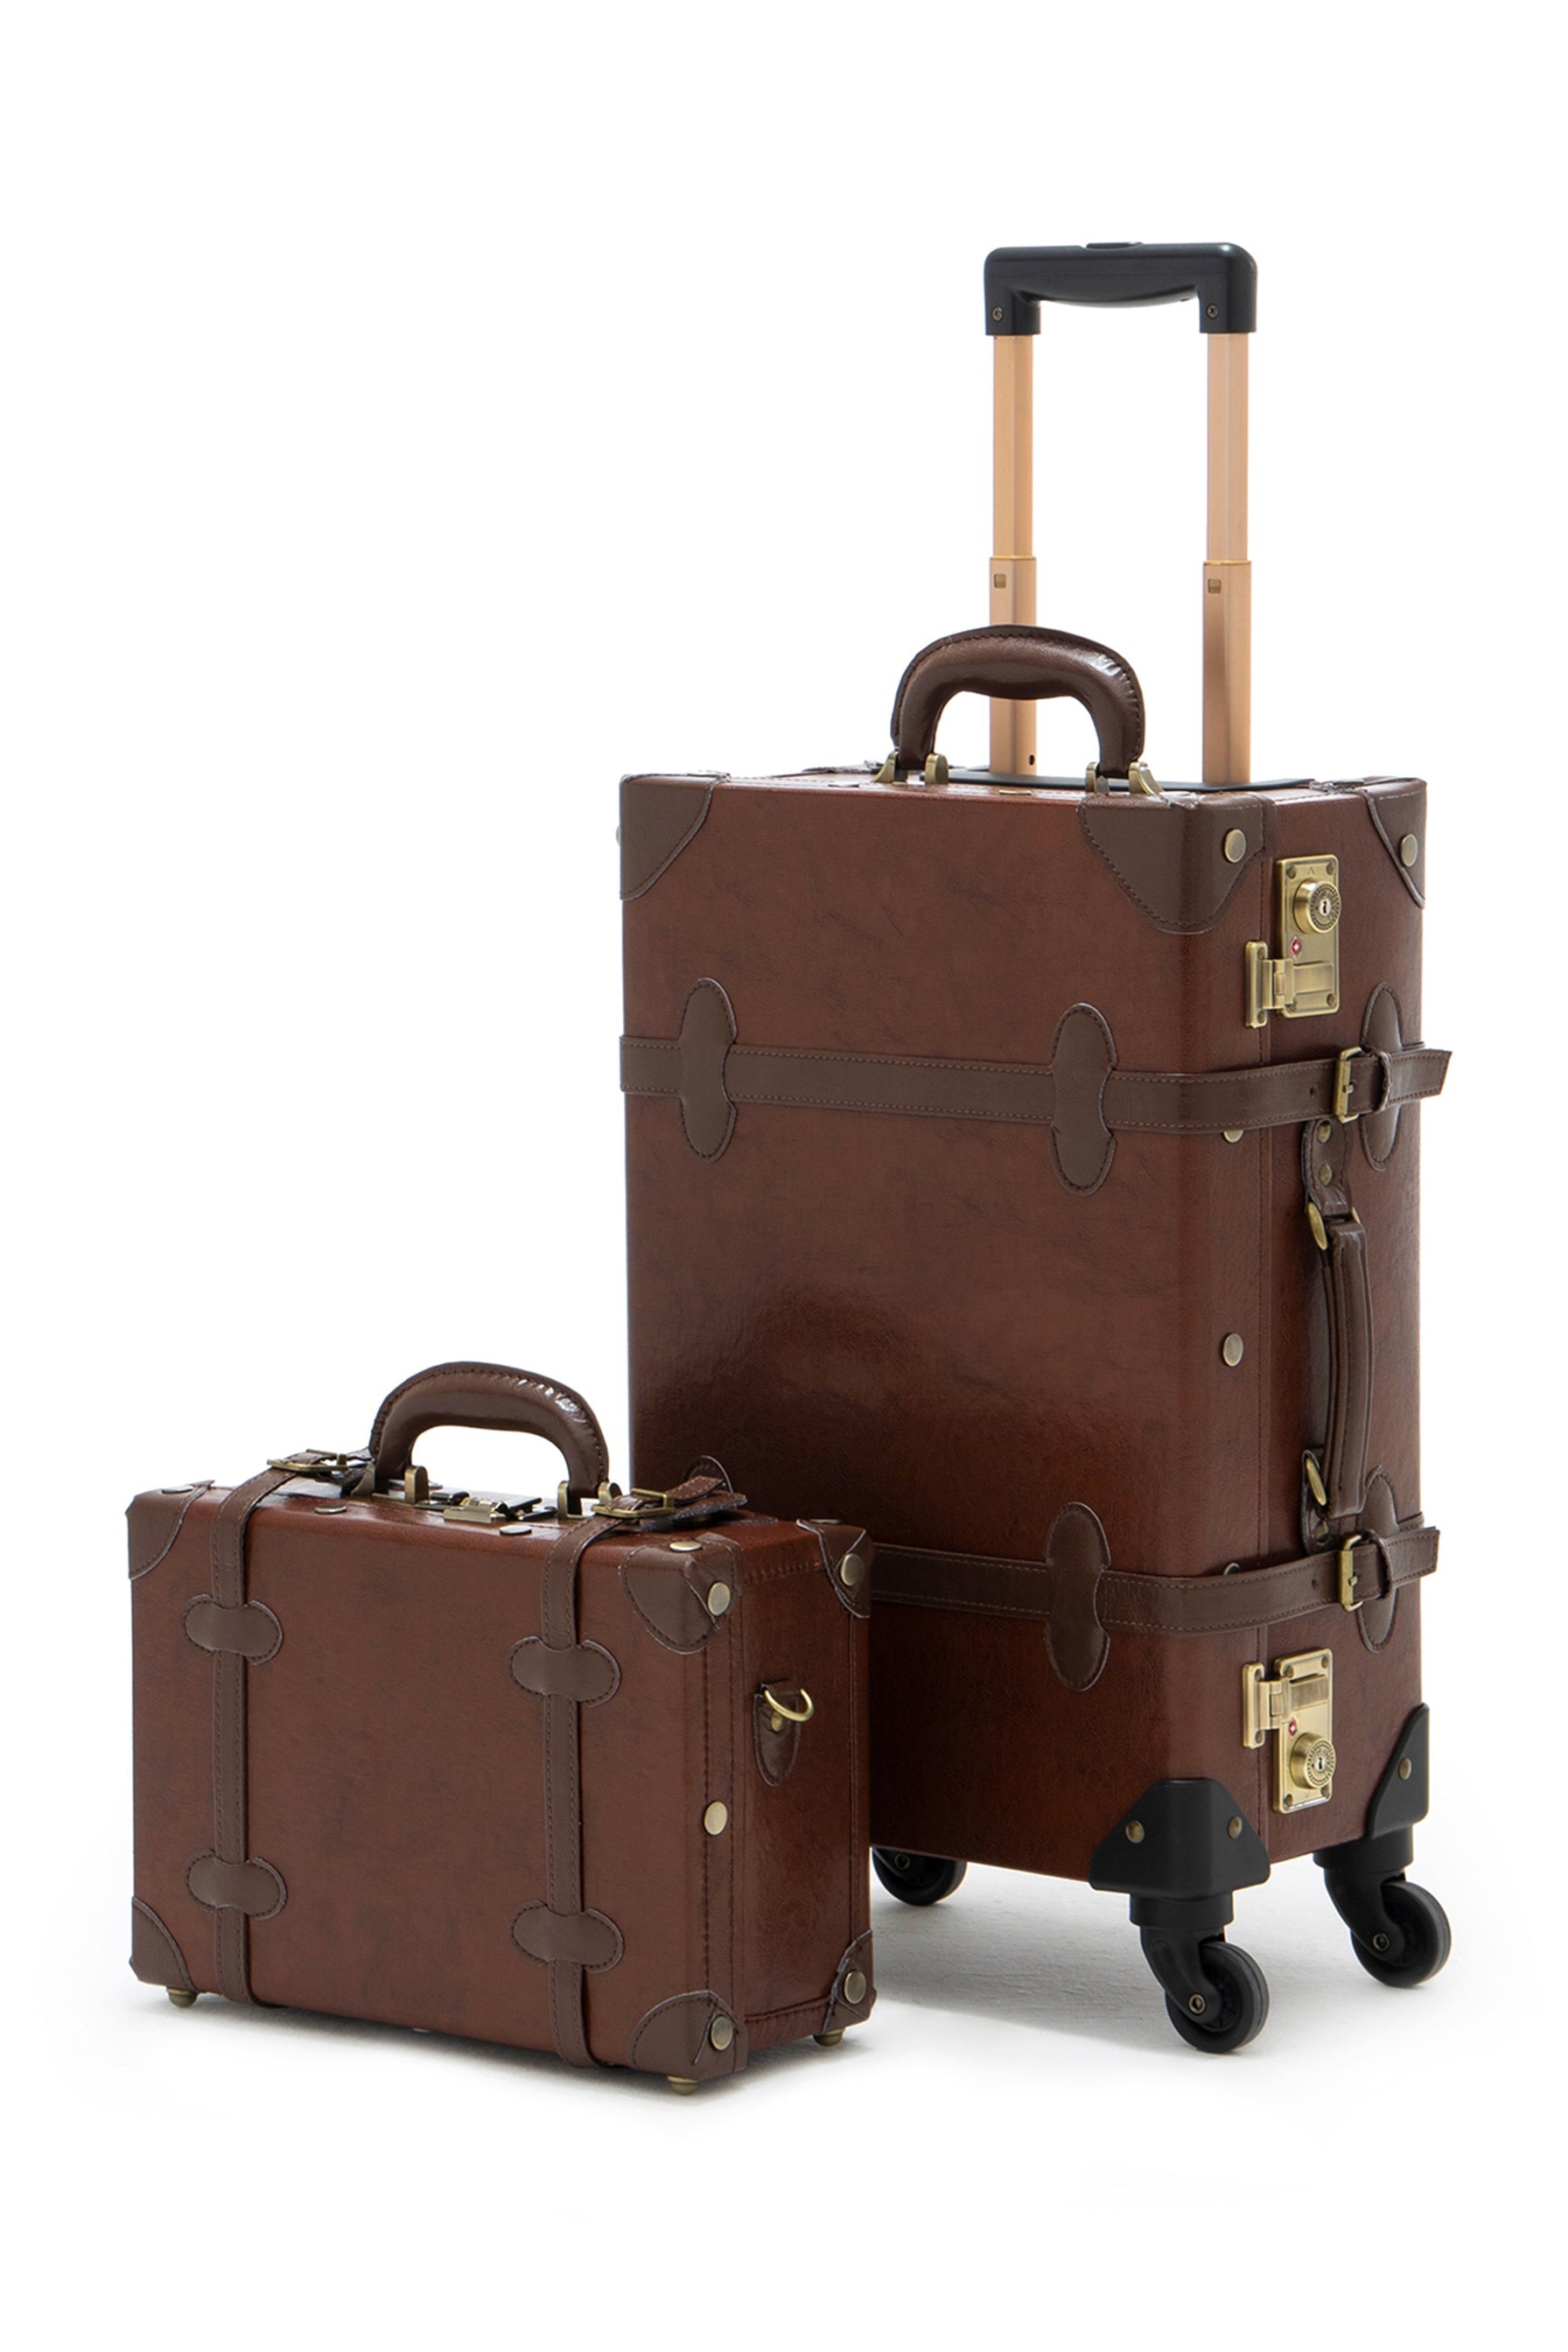 COTRUNKAGE Vintage Luggage Sets 2 Pieces TSA Lock Carry On Suitcase for  Women with Spinner Wheels, Cocoa Brown 